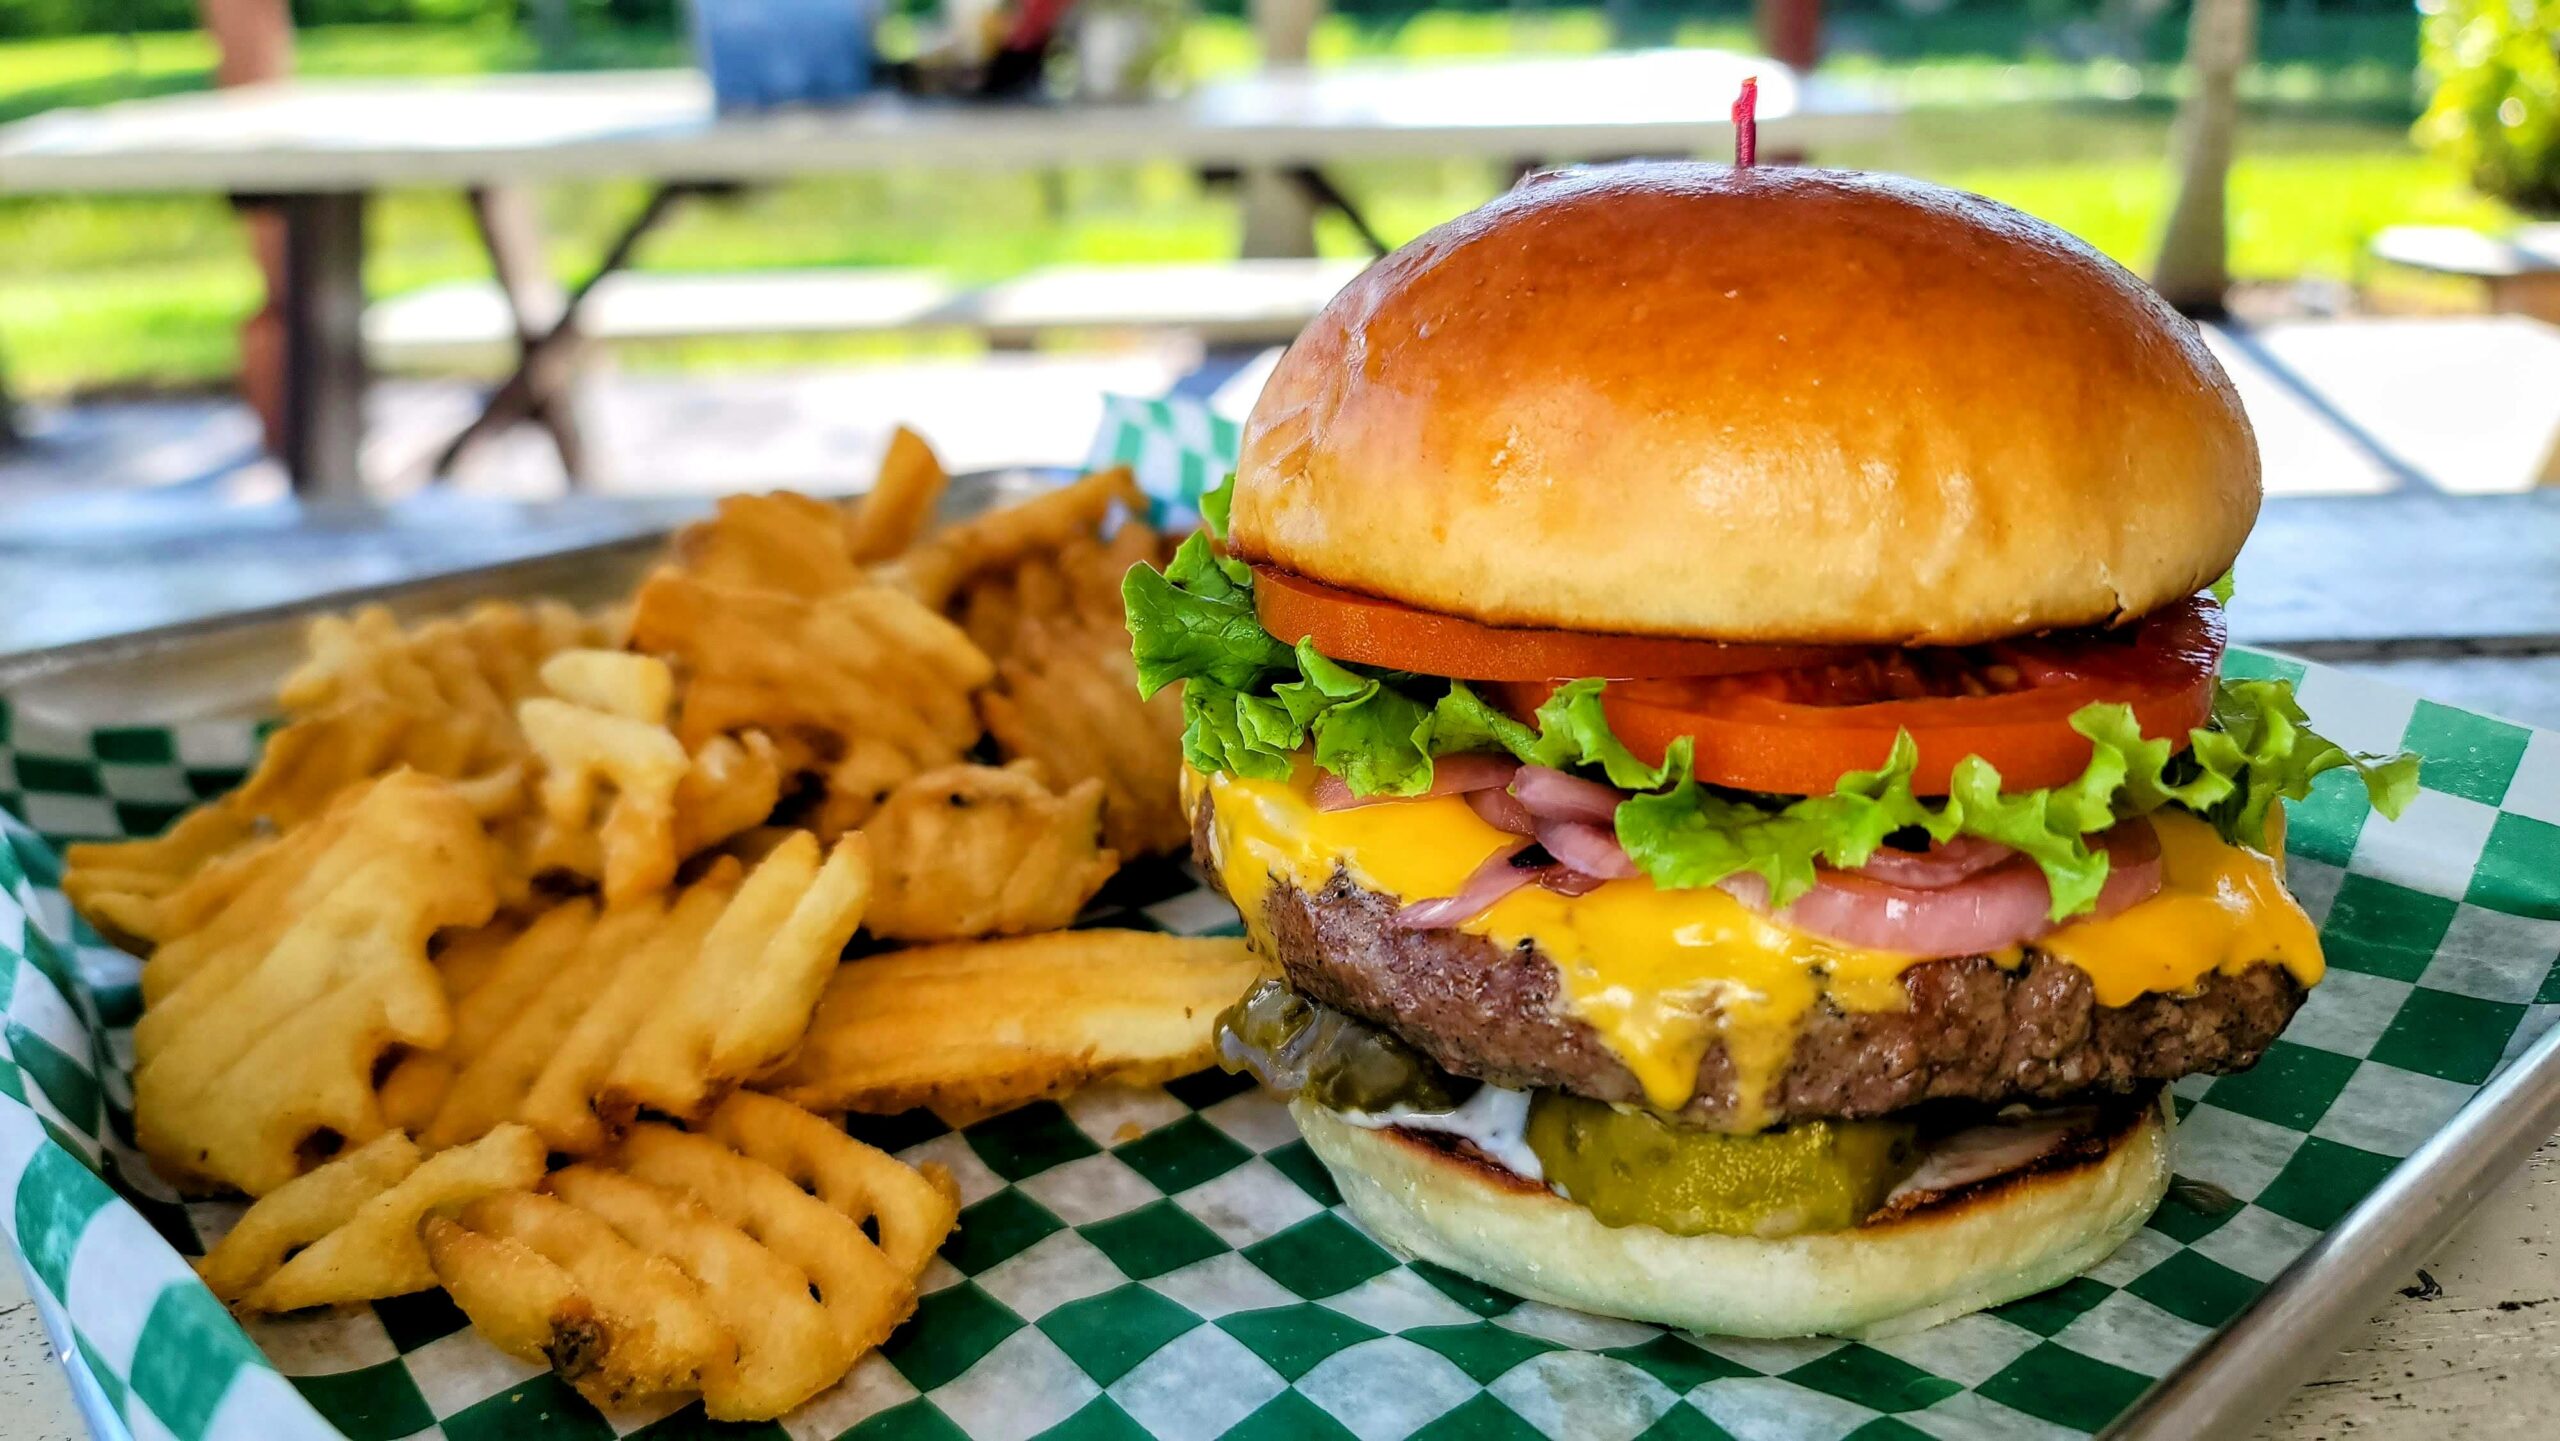 Delicious steak burger place coming to Ocean County, NJ